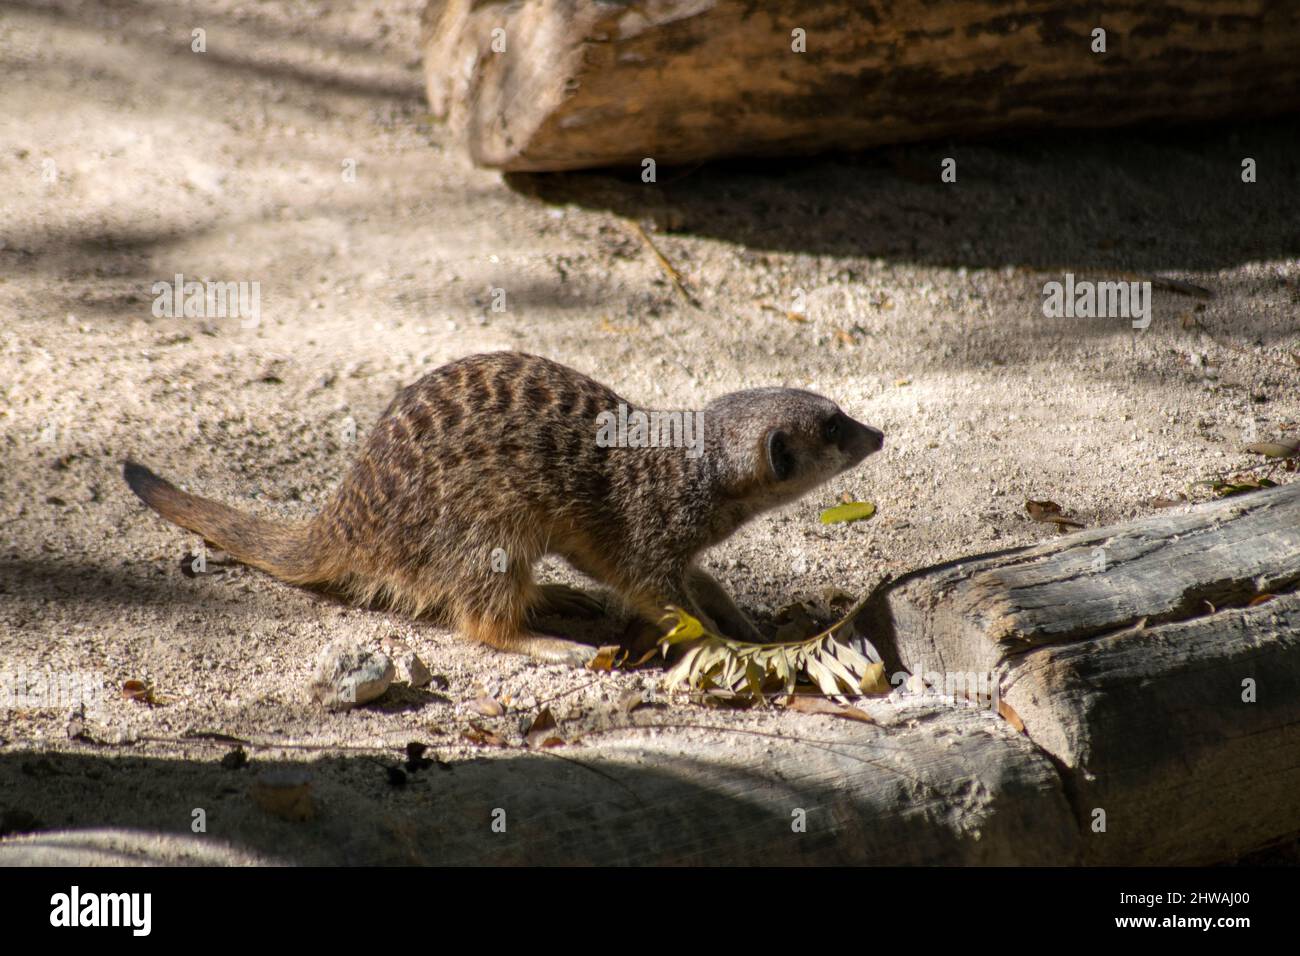 The meerkat (Suricata suricatta) or suricate, small mongoose found in southern Africa with a broad head, large eyes, a pointed nose. Stock Photo